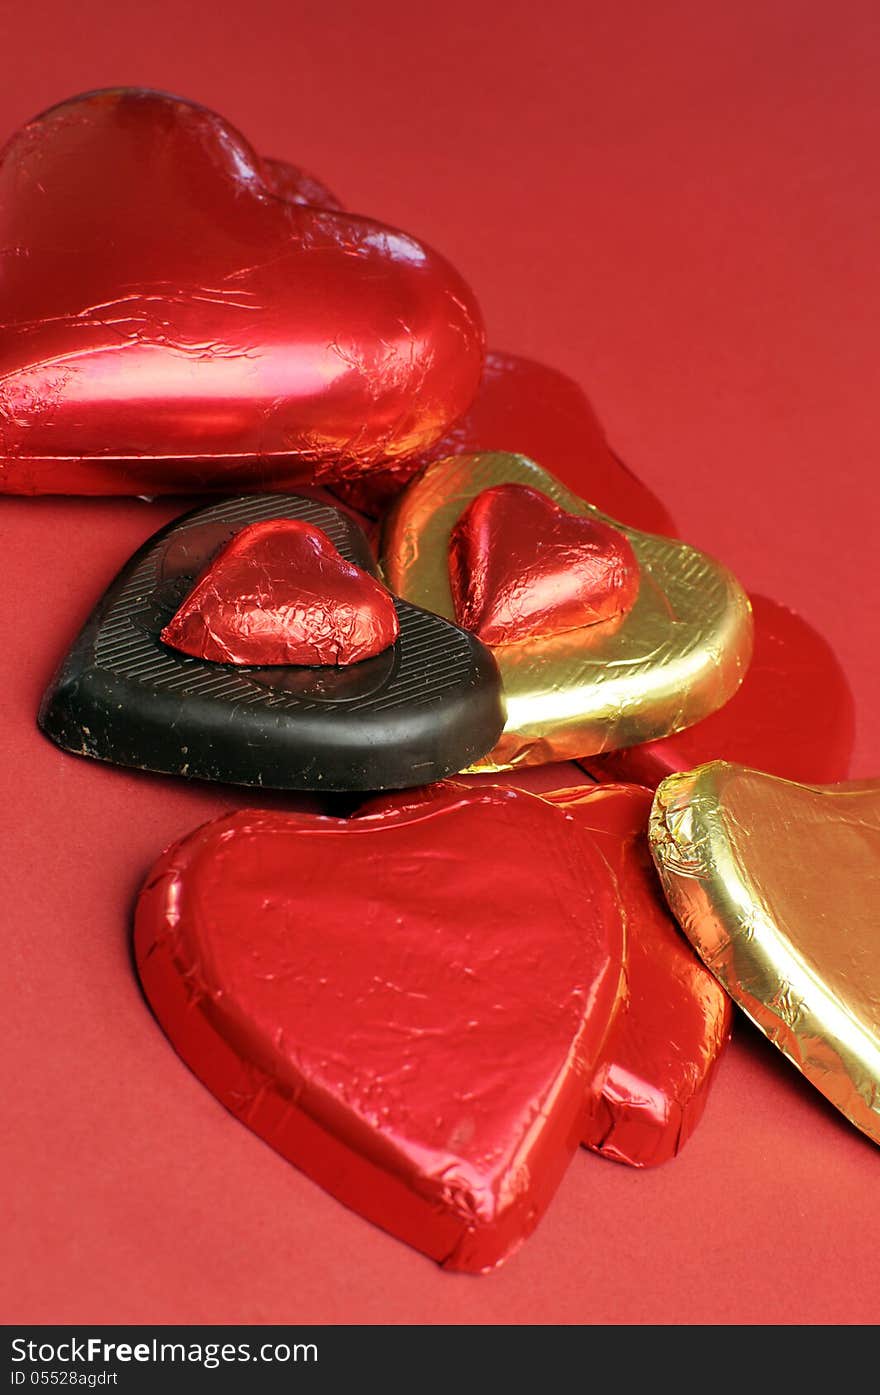 Red and gold wrapped chocolates against a red background for Valentine's Day, Christmas, birthday or someone special. Red and gold wrapped chocolates against a red background for Valentine's Day, Christmas, birthday or someone special.